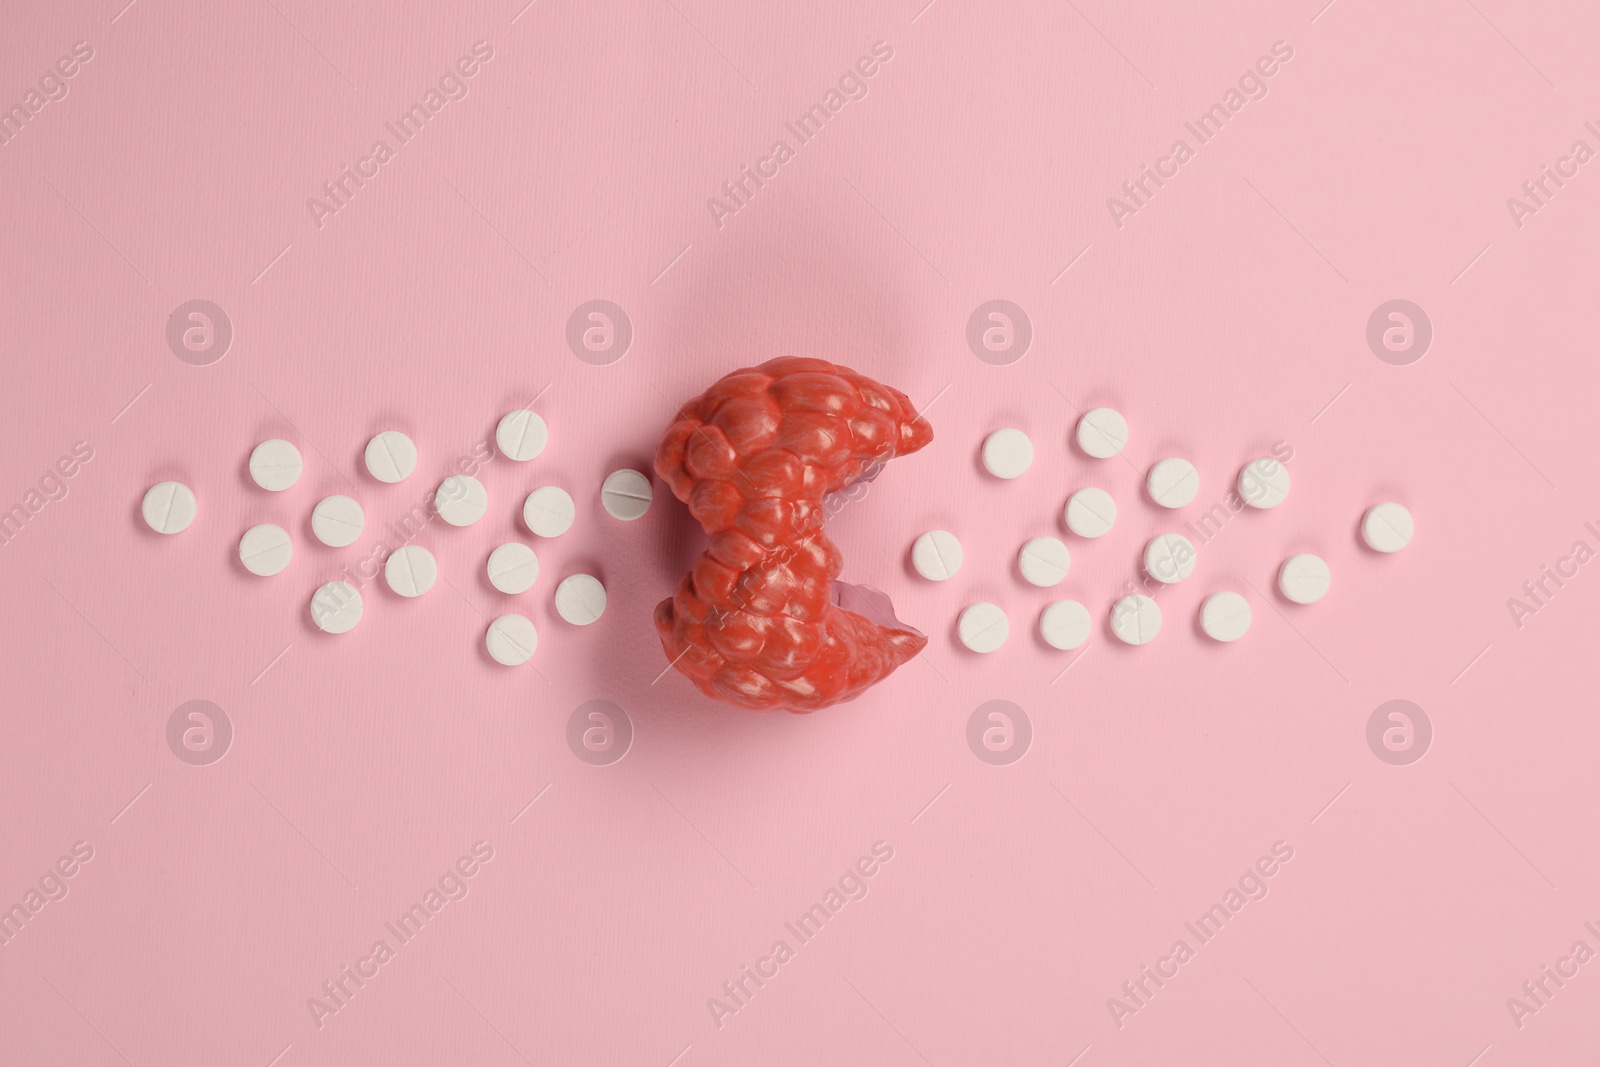 Photo of Endocrinology, Pills and model of thyroid gland on pink background, top view